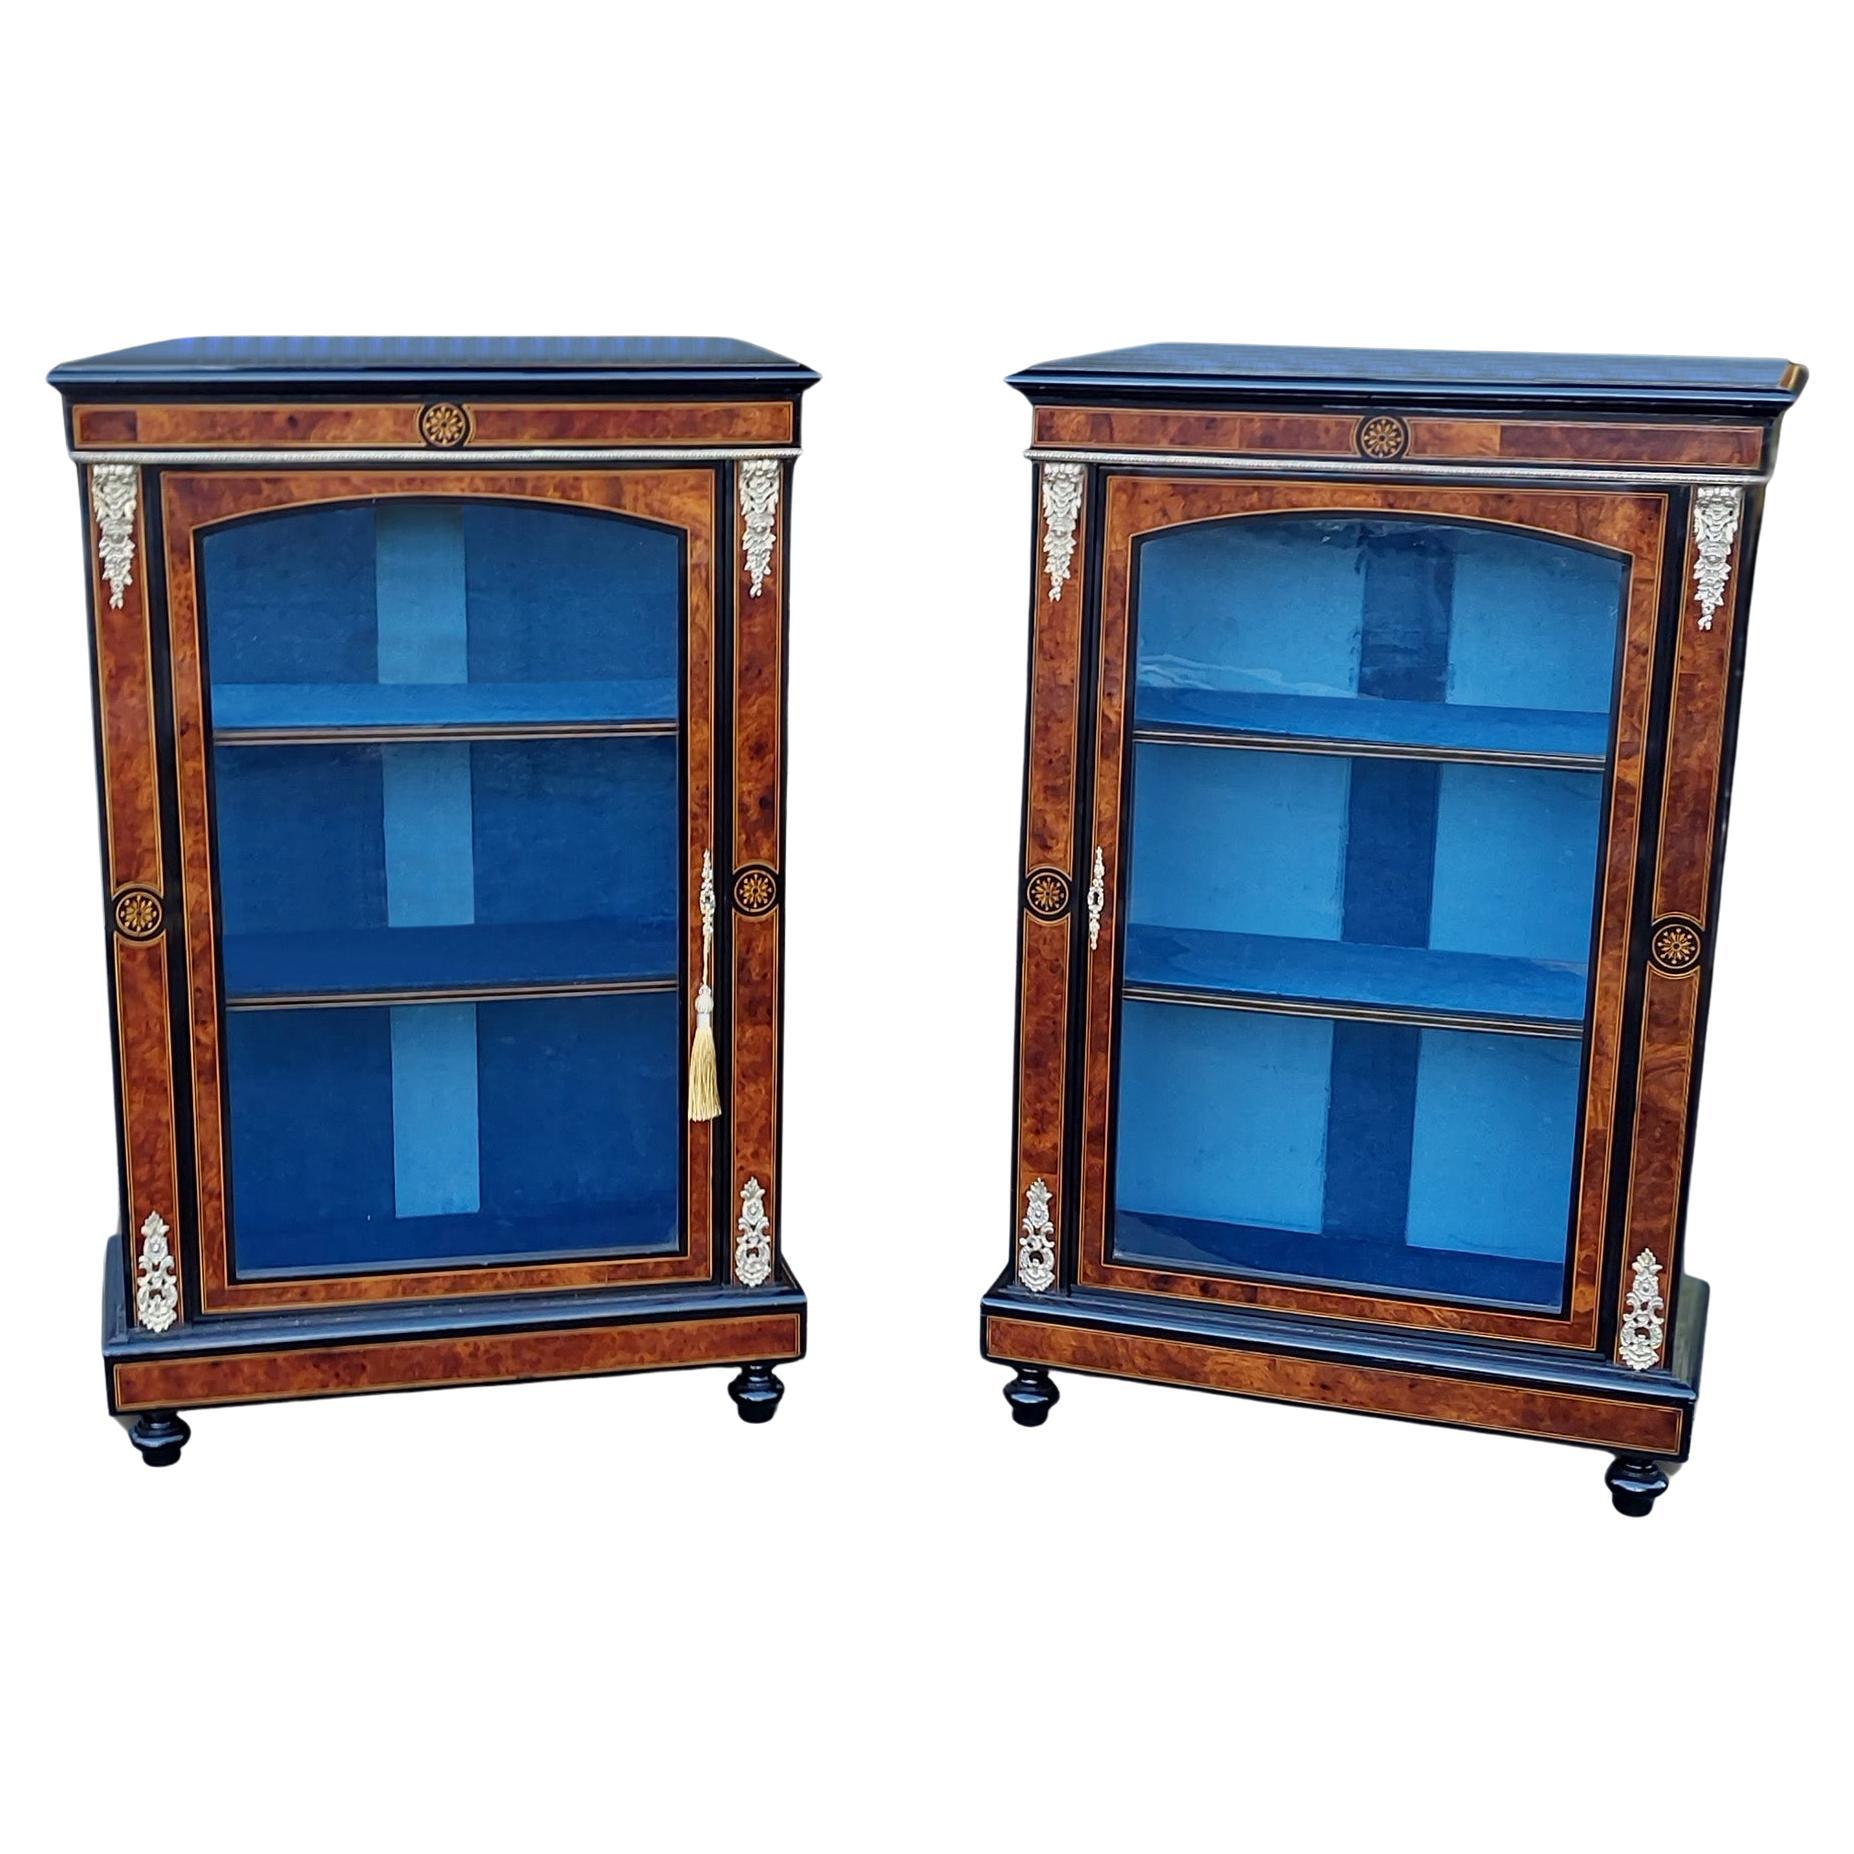 Pair of Victorian Marquetry, Ebony Framed Burr Walnut Display Cabinets For Sale